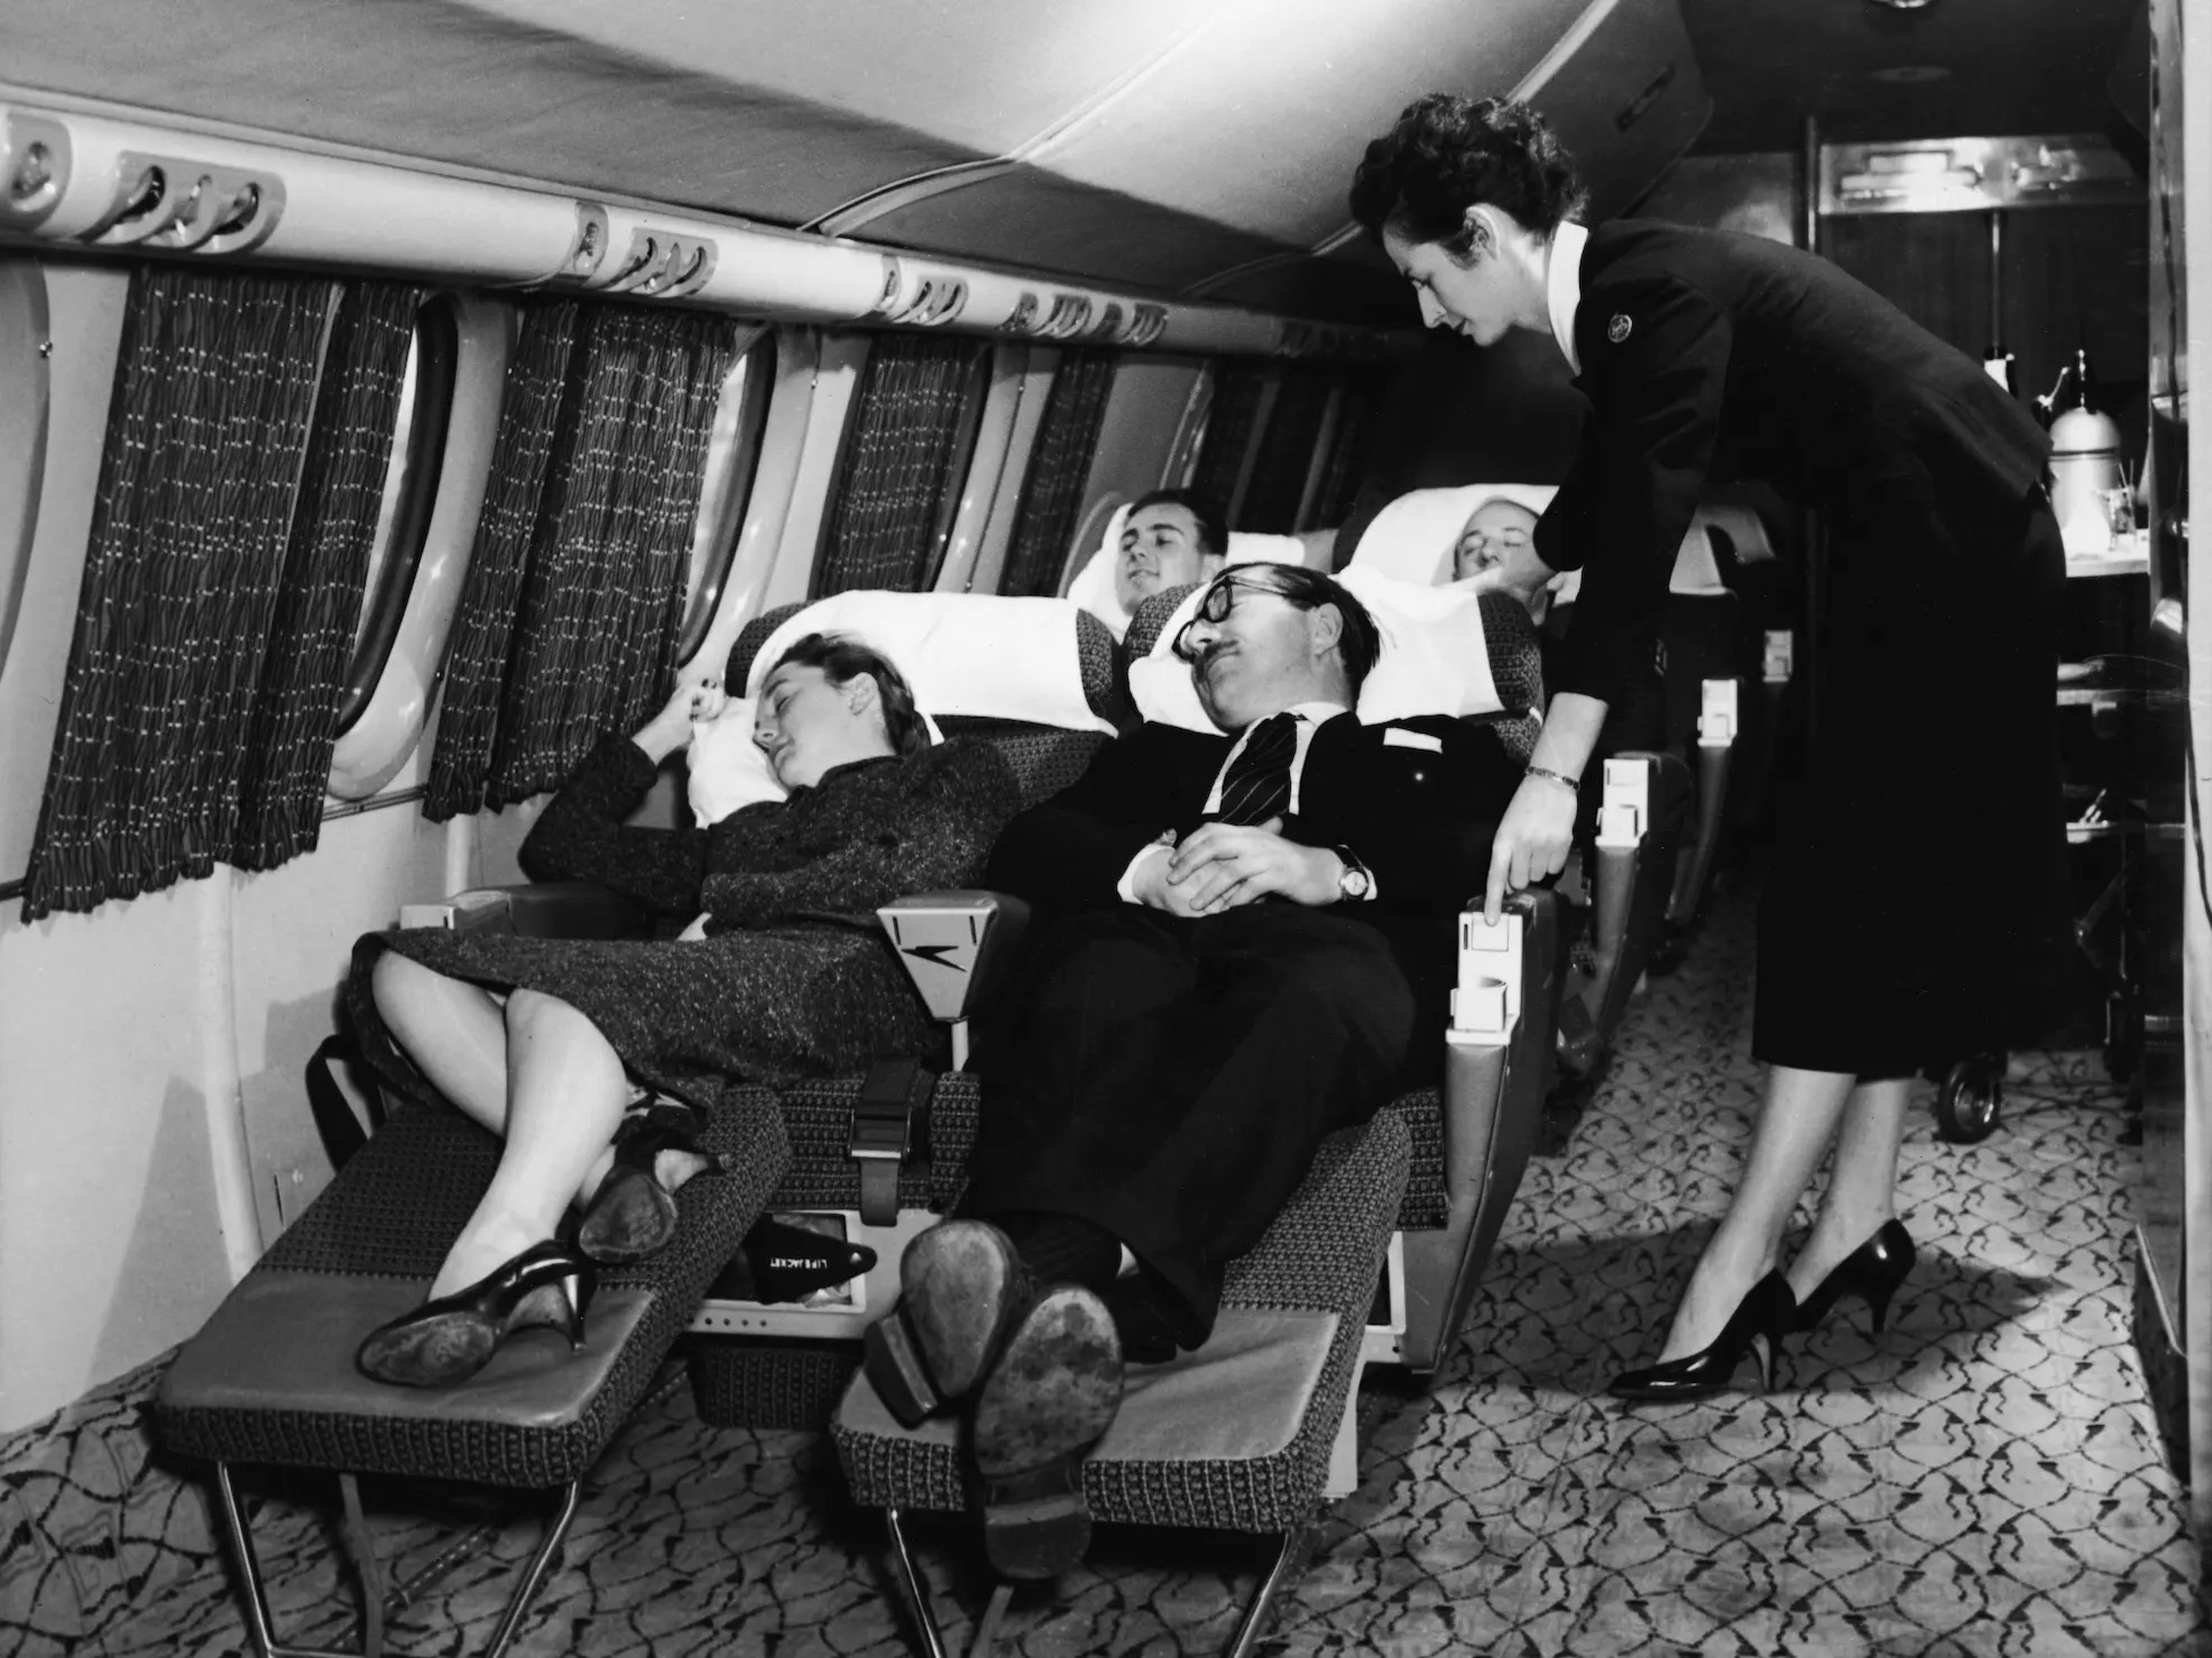 Passengers sleeping on recliners with a flight attendant assisting in the 1950s.